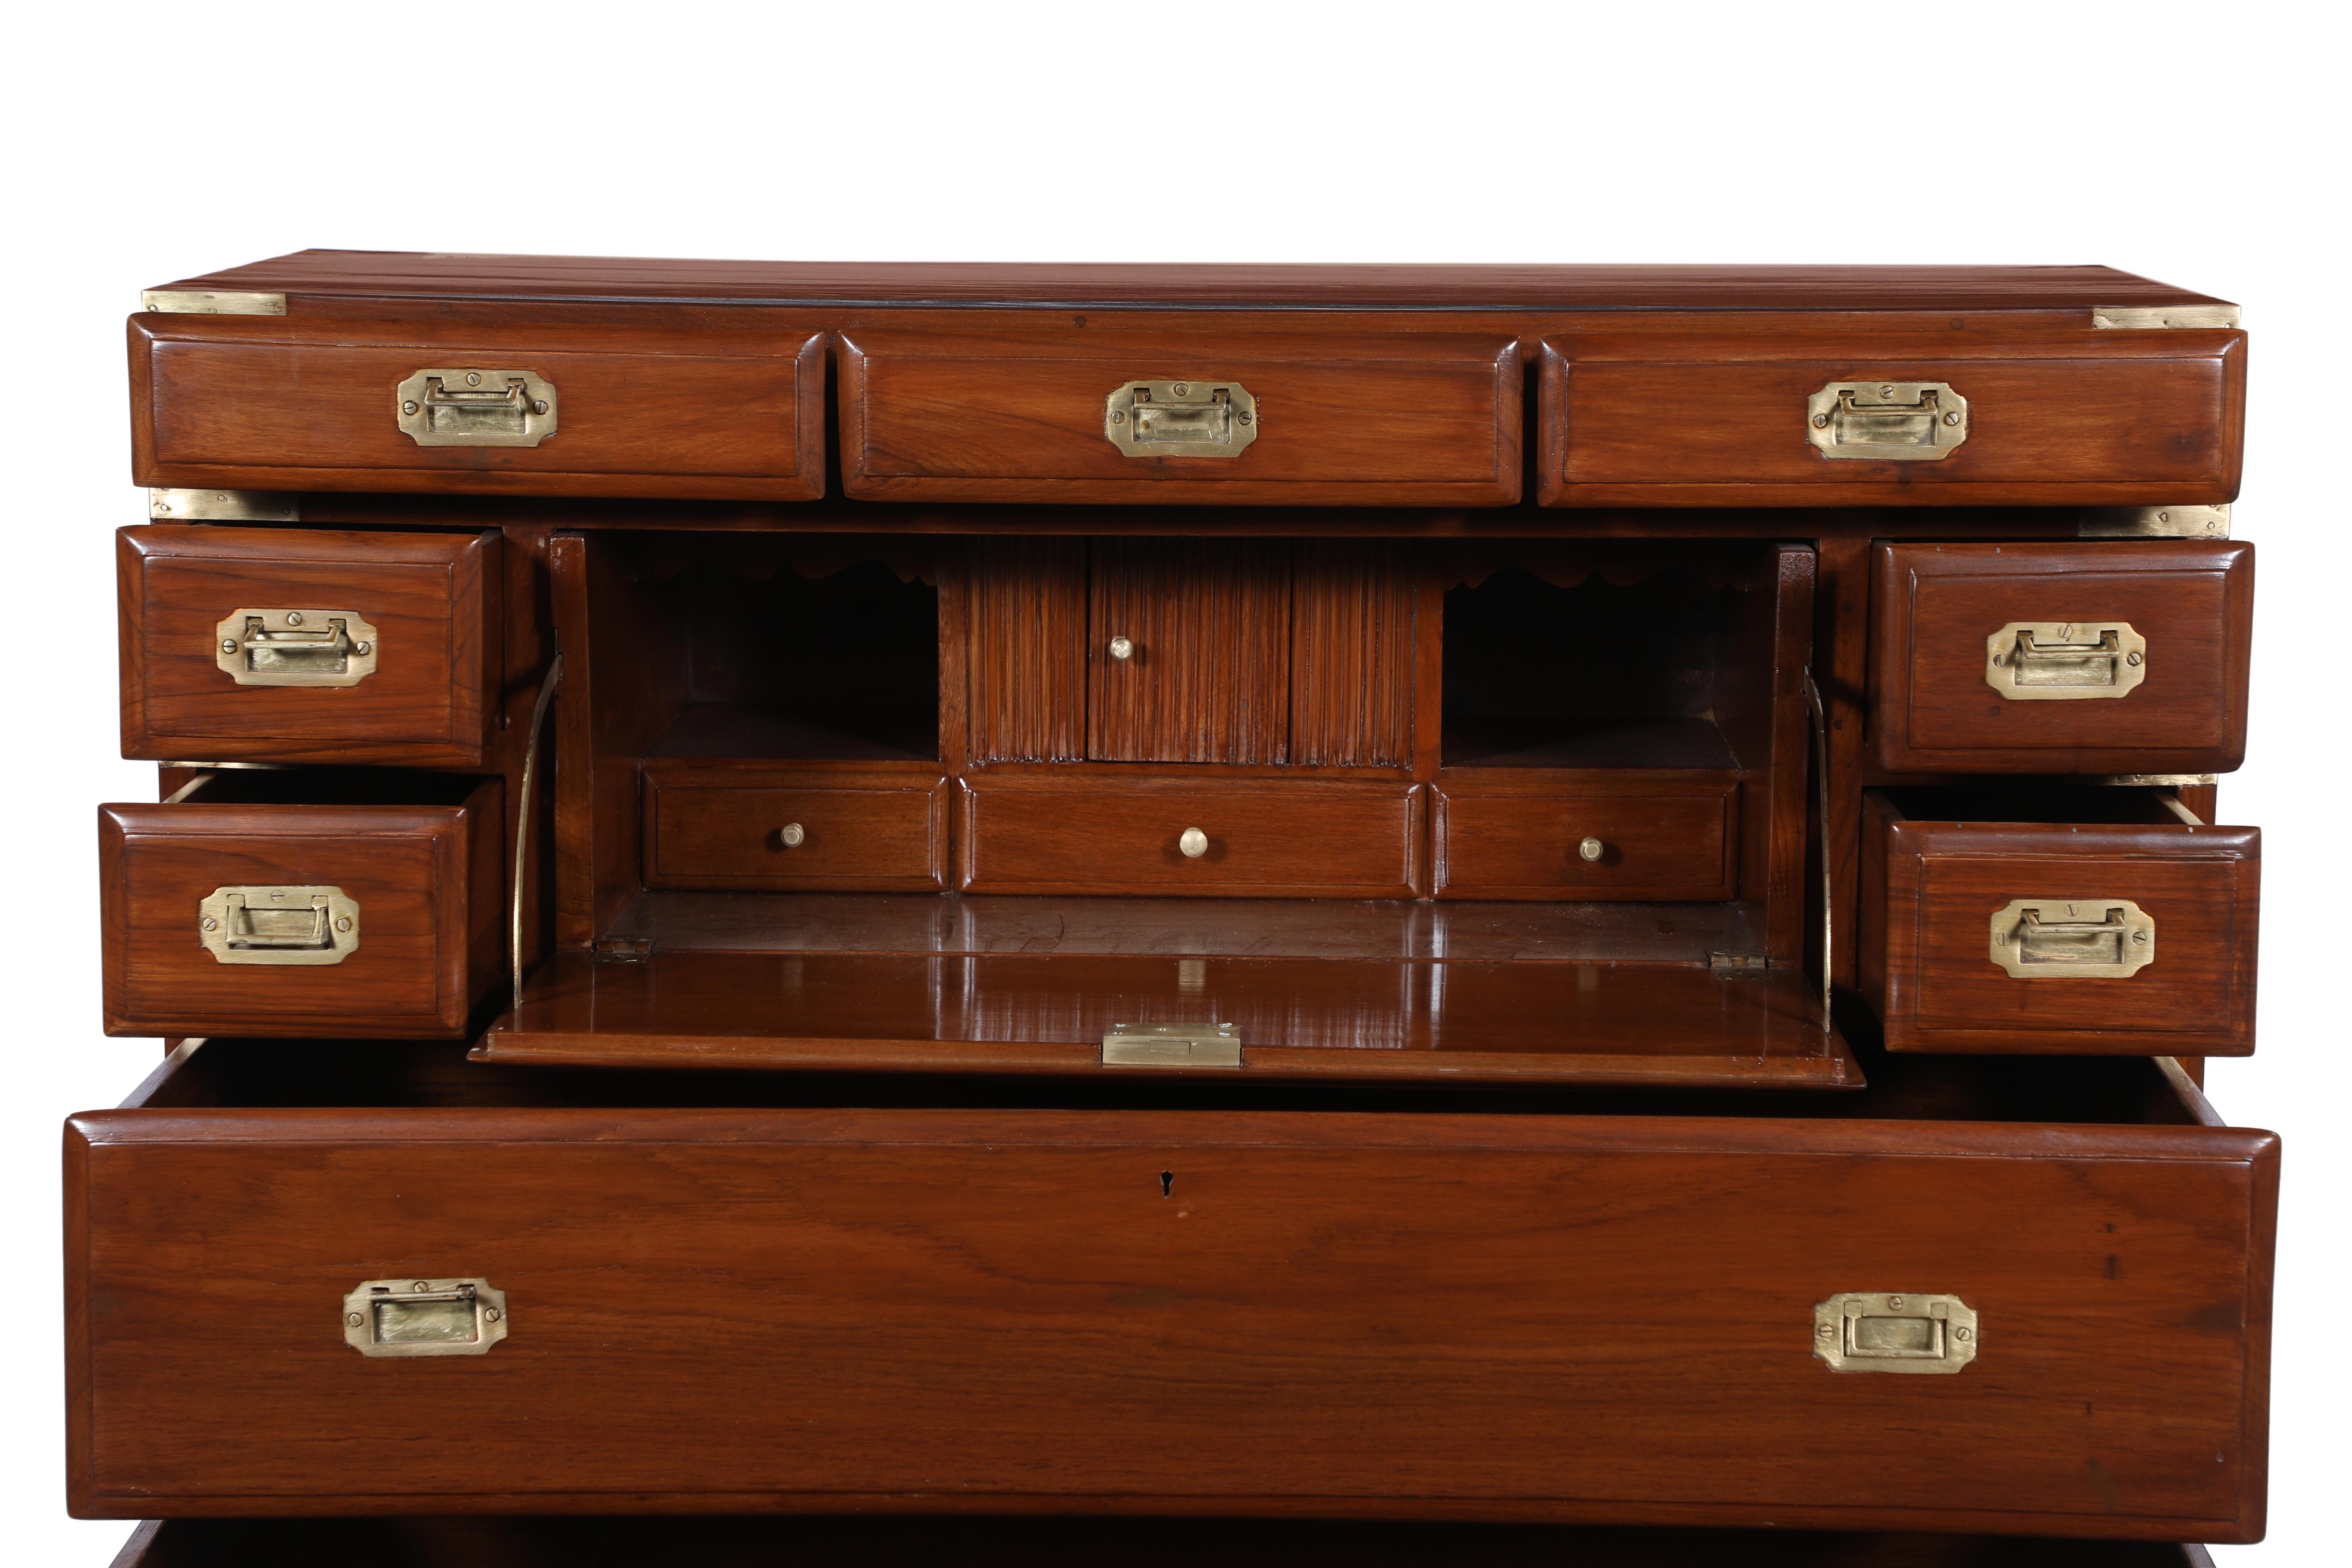 20th Century British Campaign Teak Secretary Chest of Drawers and Desk, Early 1900's